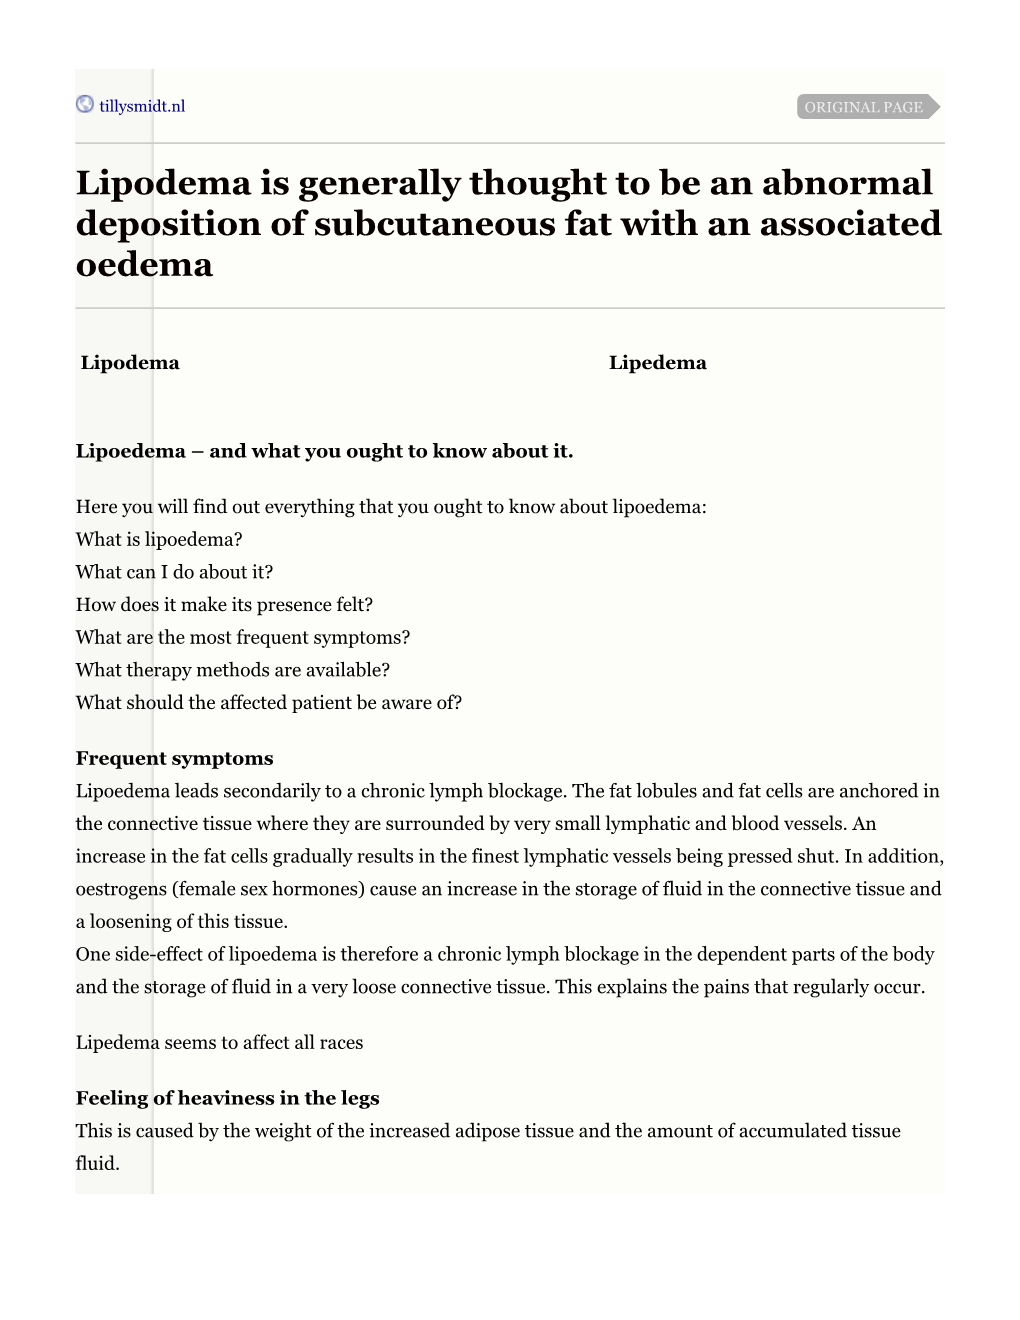 Lipodema Is Generally Thought to Be an Abnormal Deposition of Subcutaneous Fat with an Associated Oedema